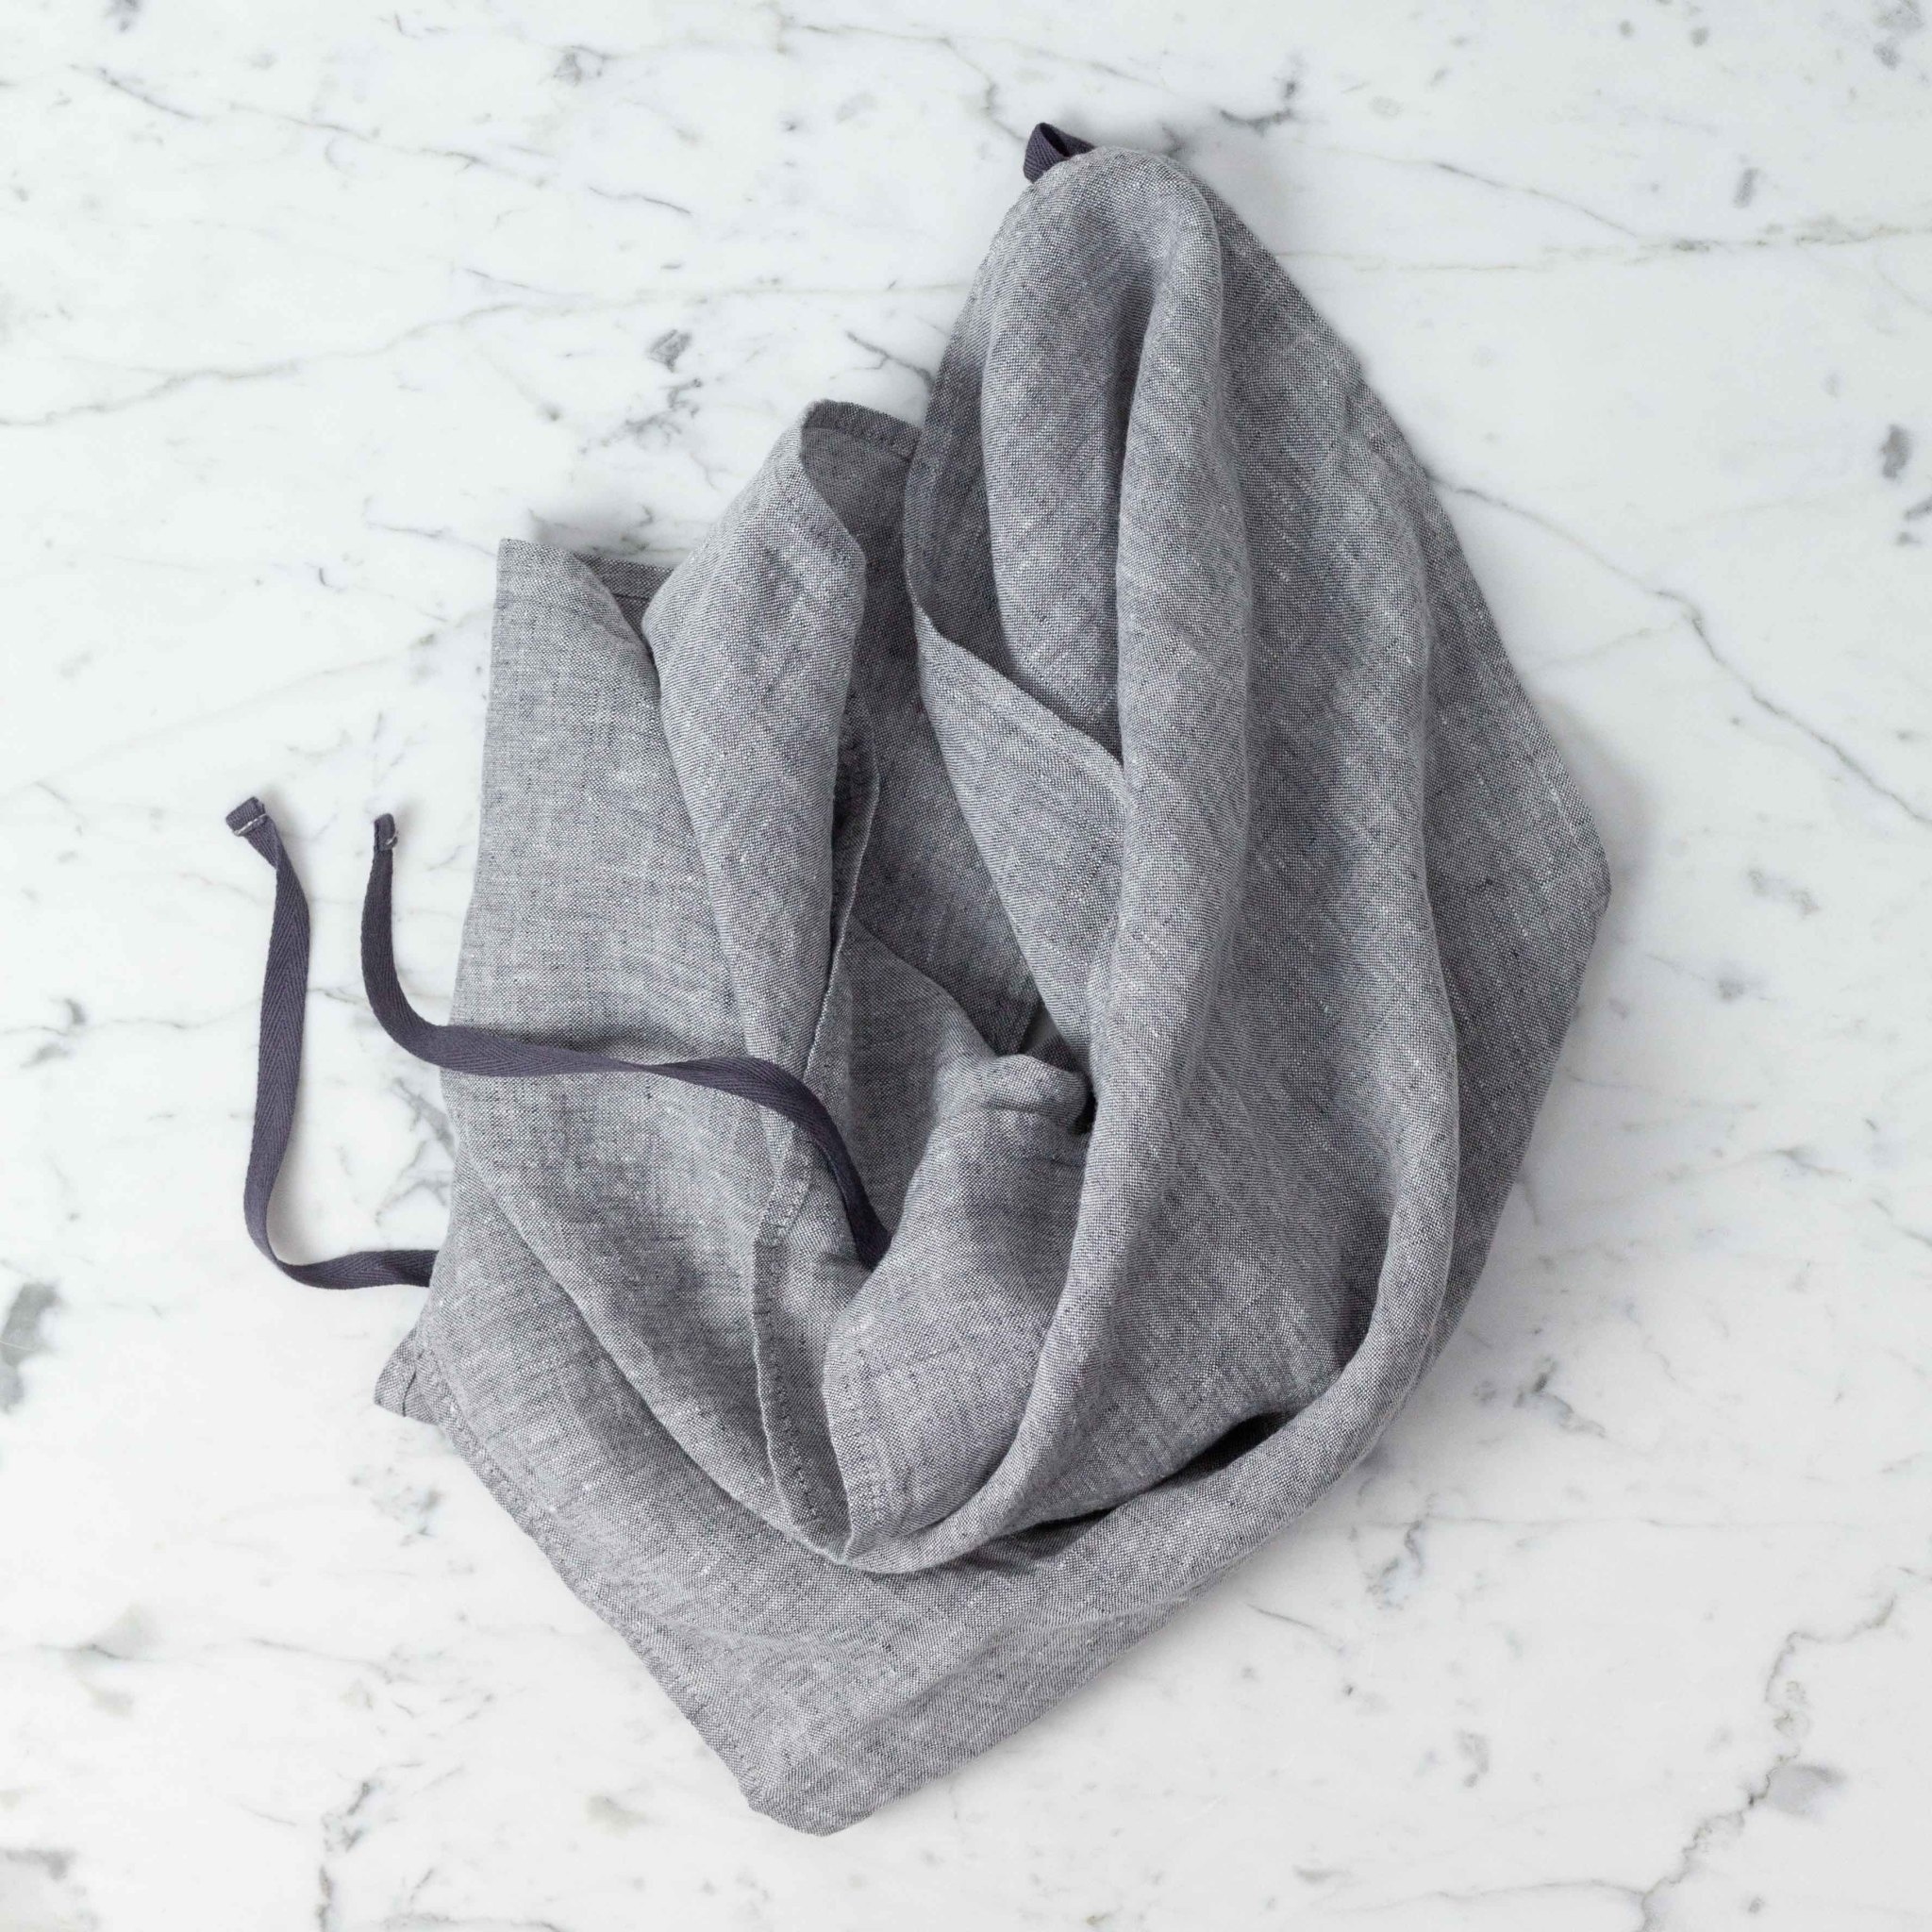 Linge Particulier French Linen Apron Towel - Grey Chine